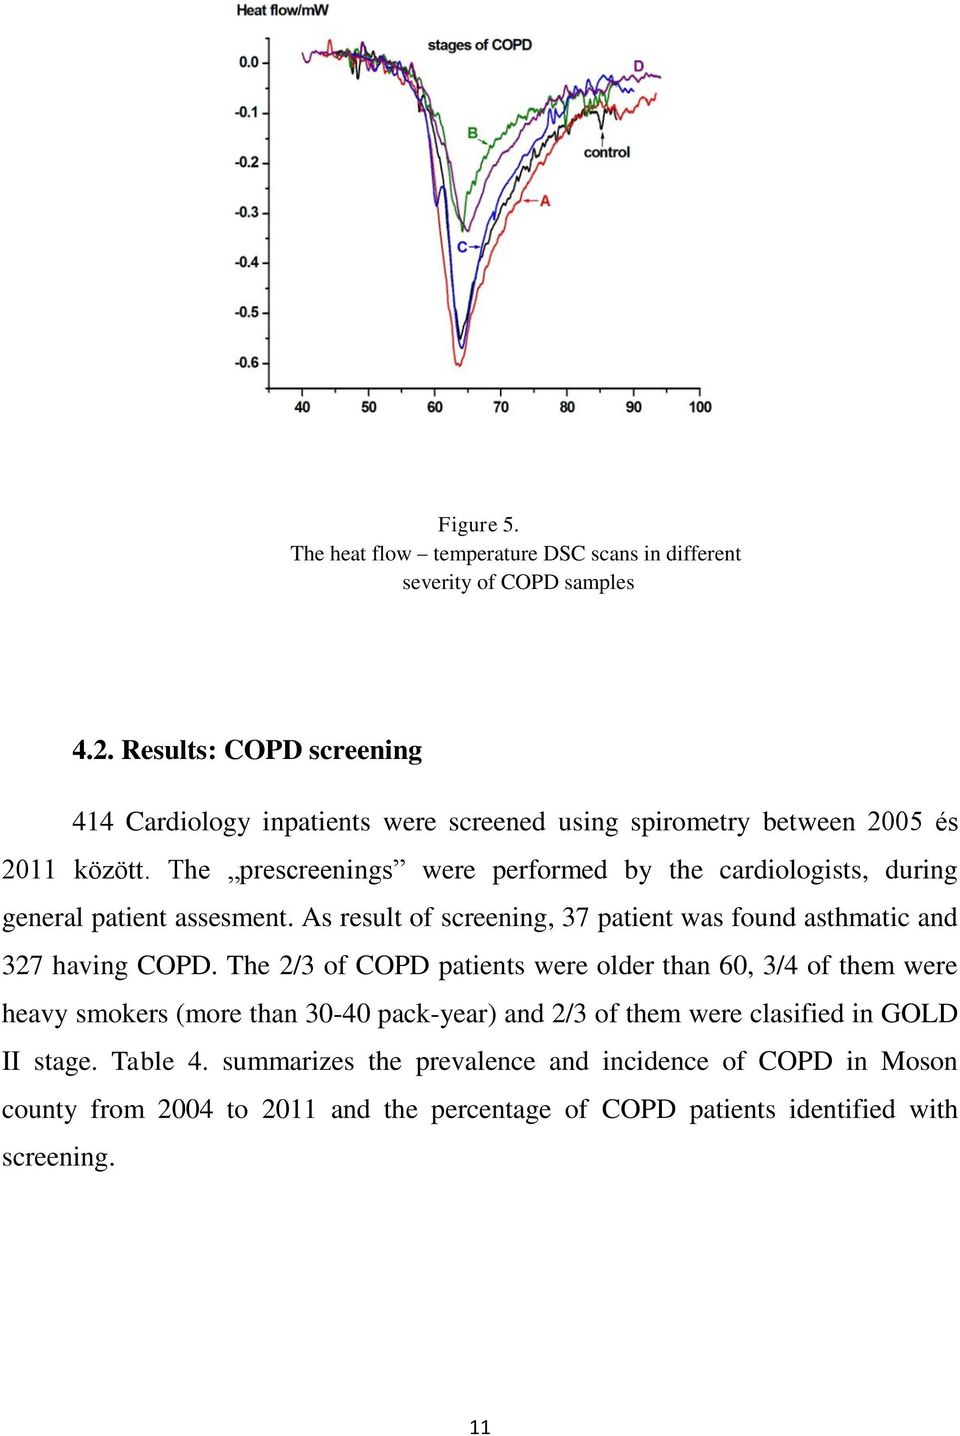 The prescreenings were performed by the cardiologists, during general patient assesment. As result of screening, 37 patient was found asthmatic and 327 having COPD.